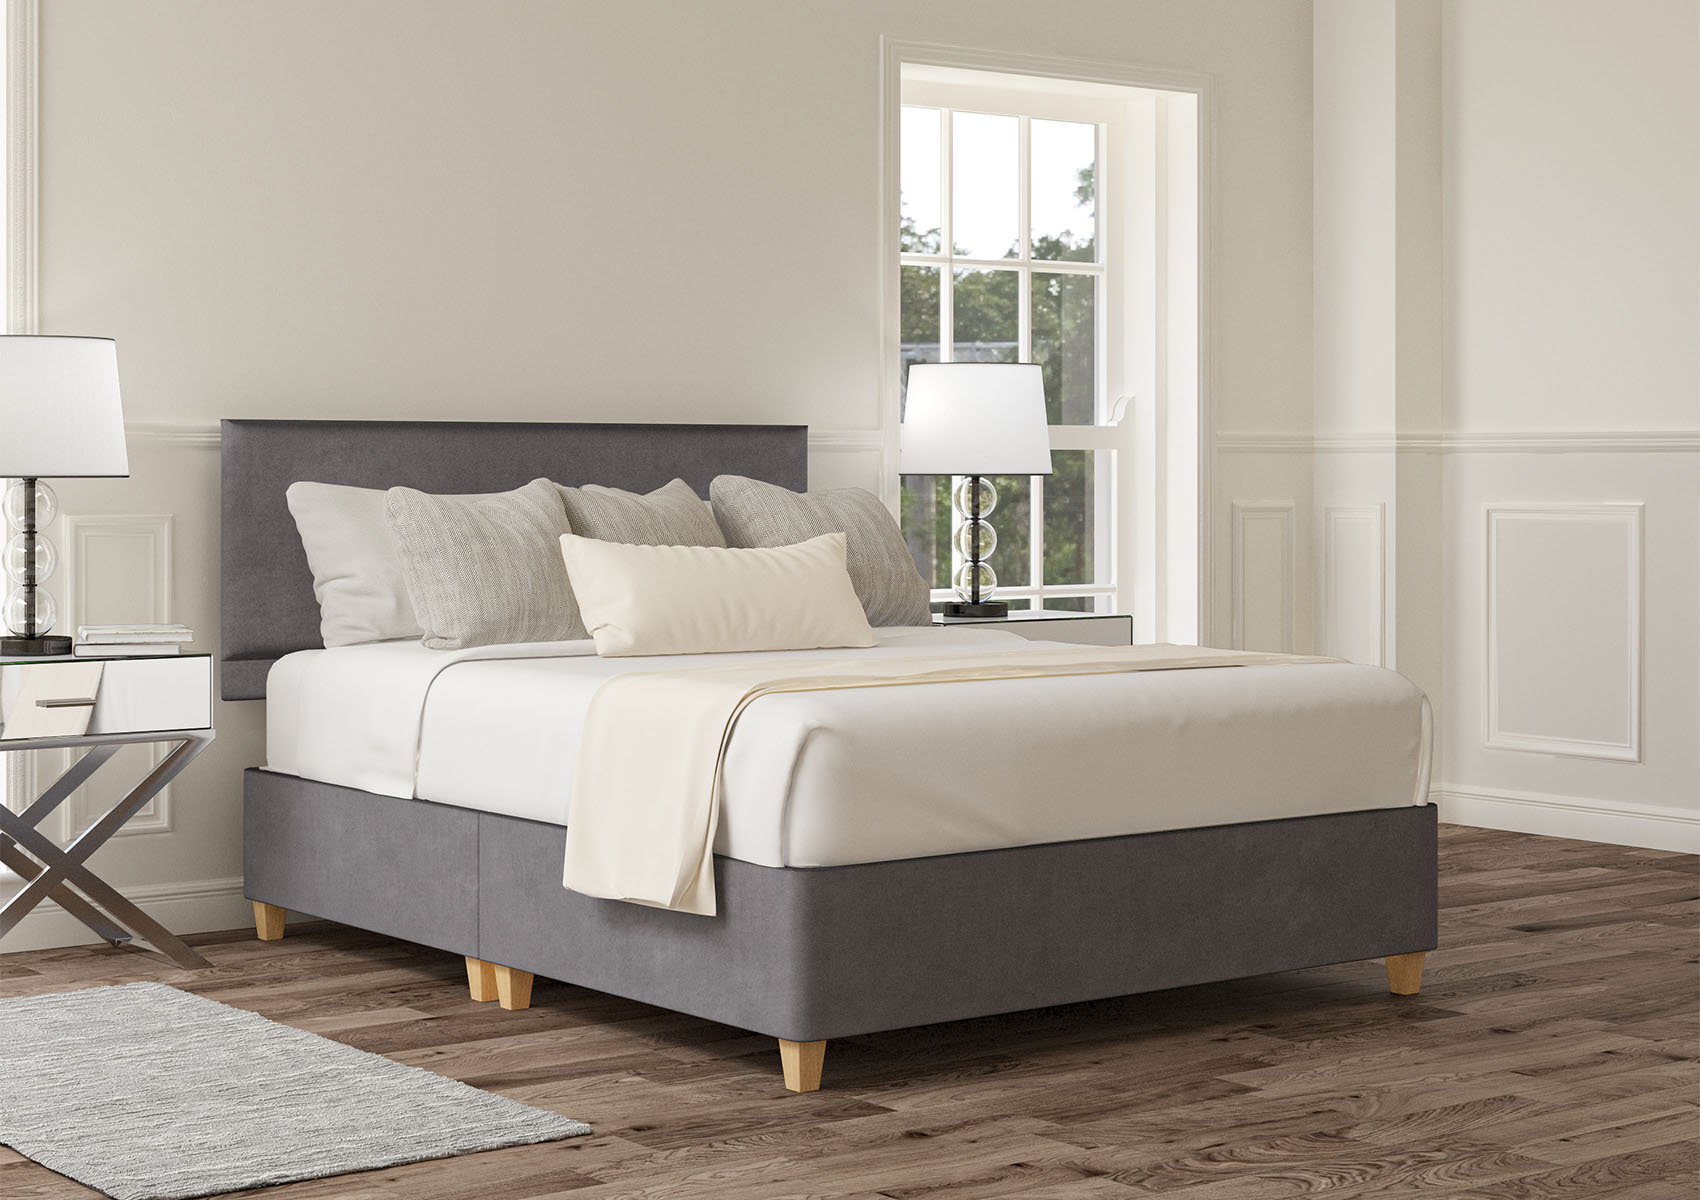 View Henley Naples Cream Upholstered Single Bed Time4Sleep information